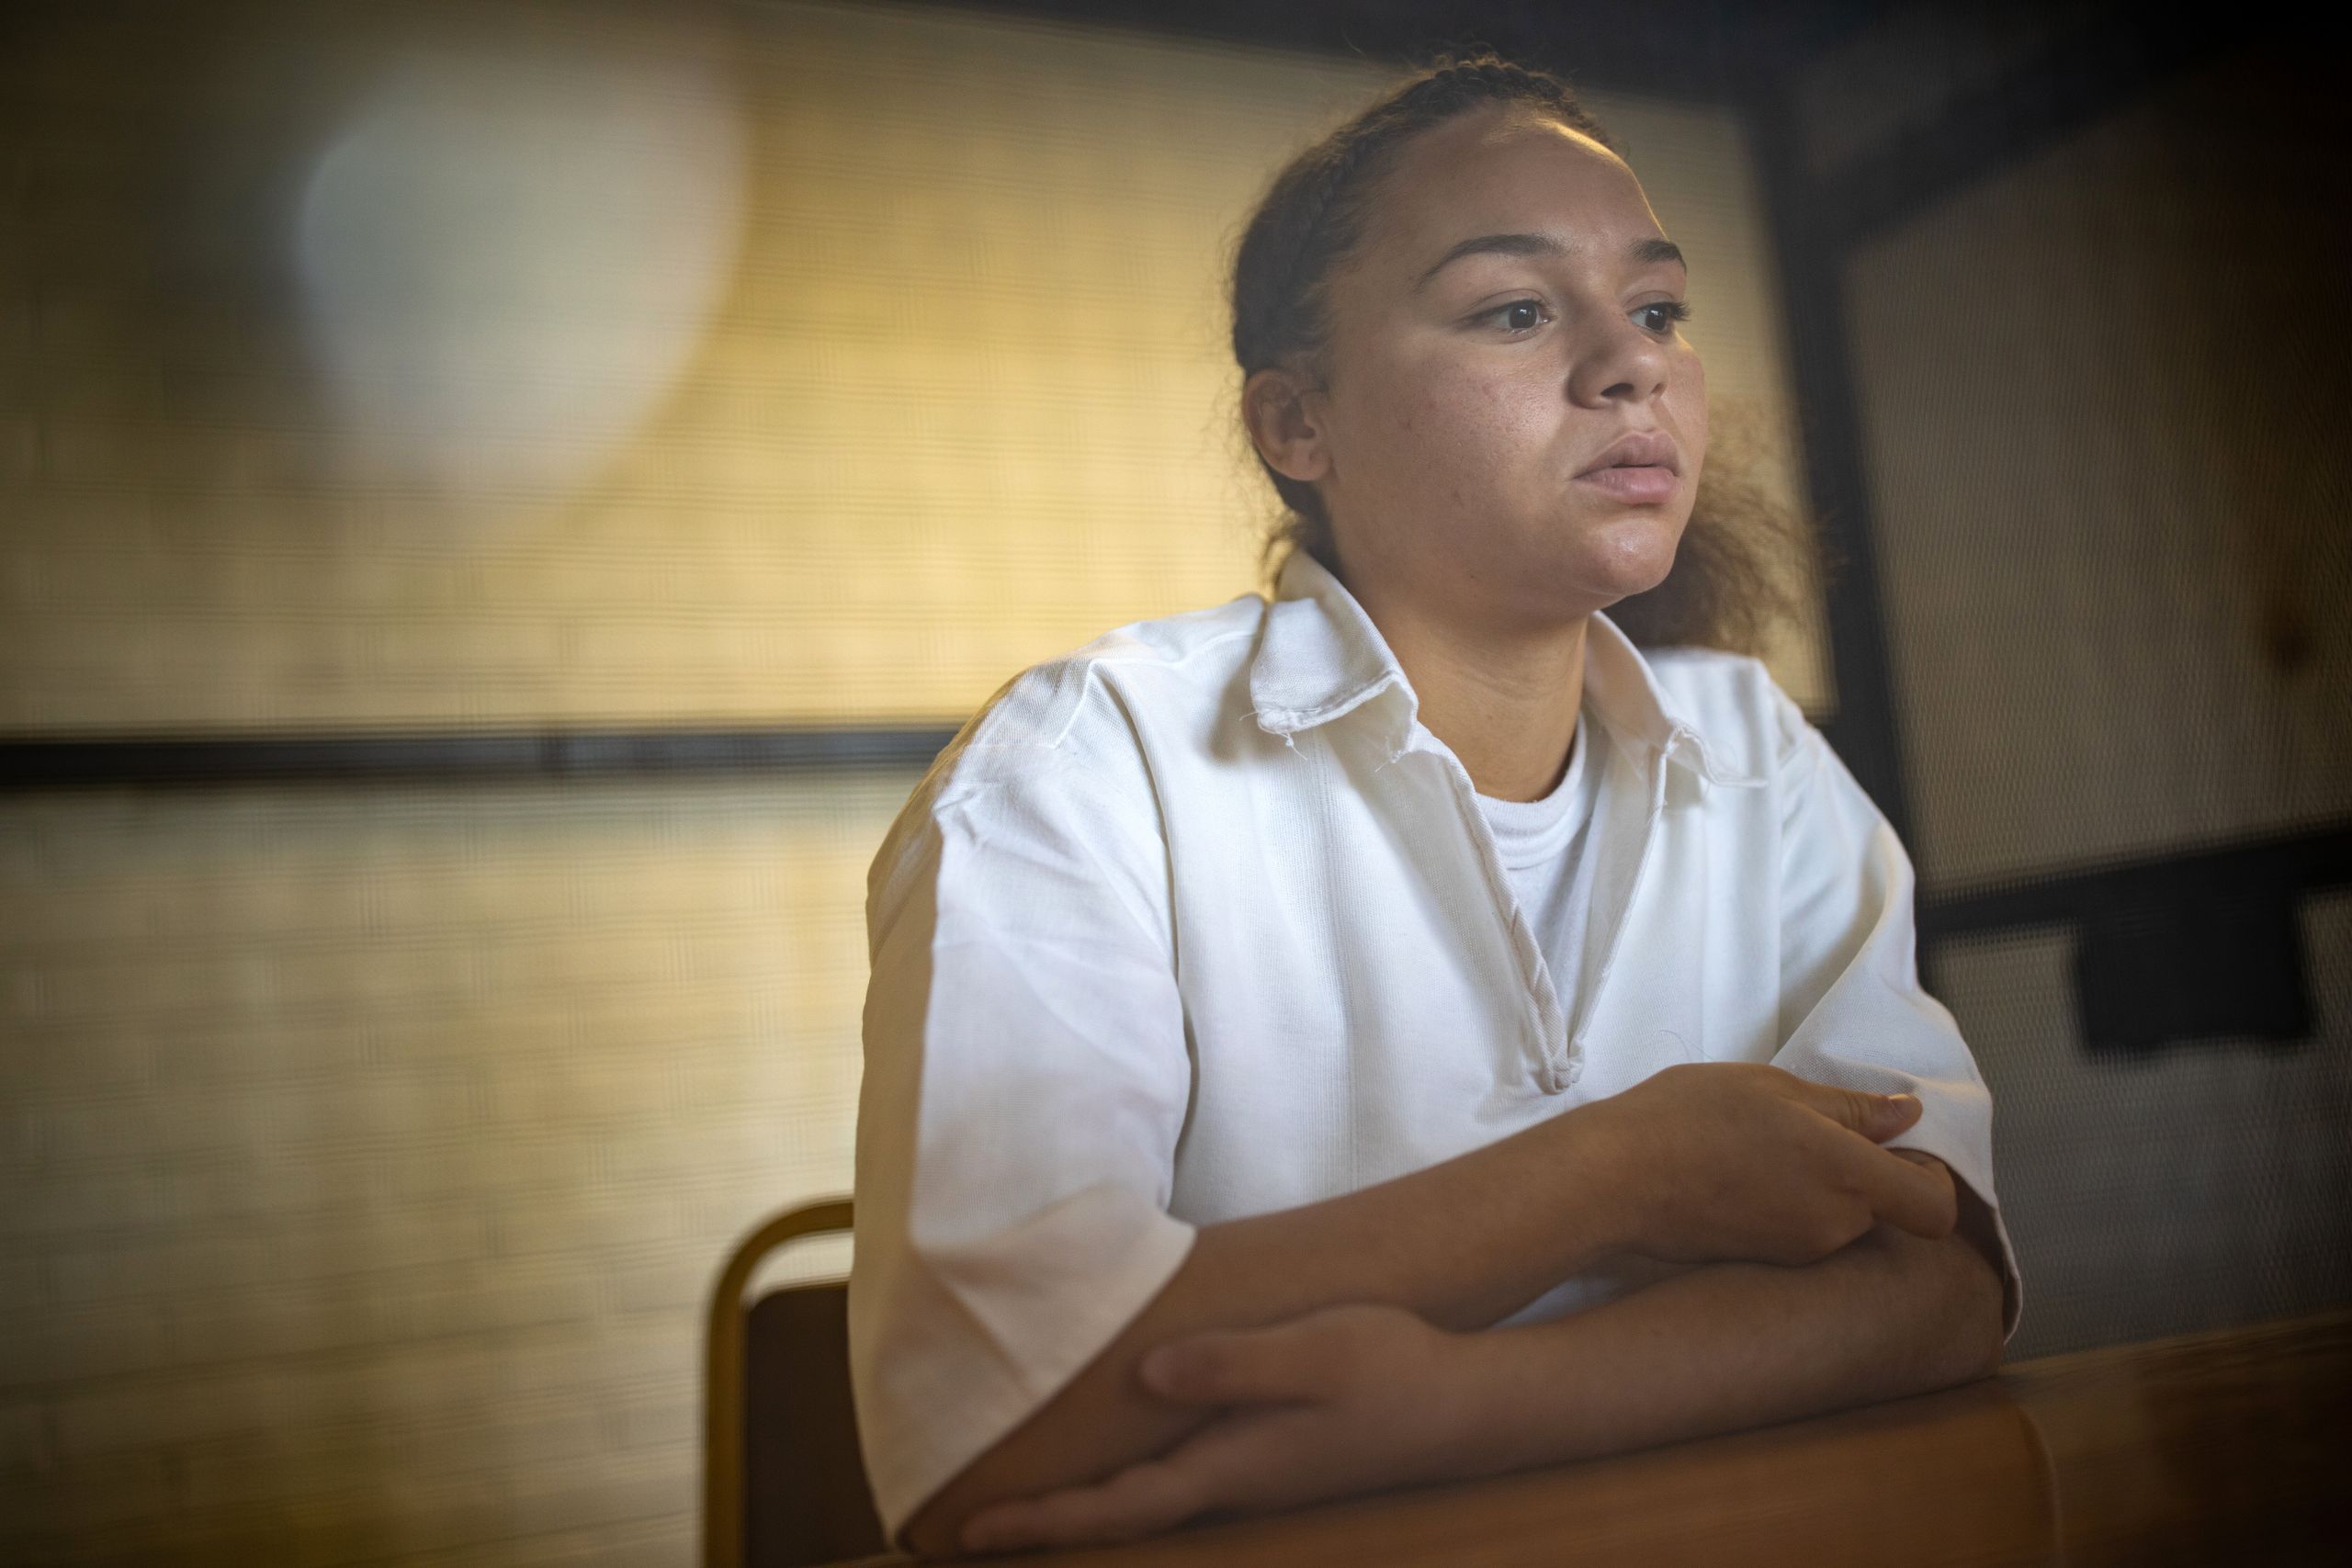 In 2016, Lici was sent to a juvenile detention center after pleading guilty to charges of aggravated robbery and kidnapping. 